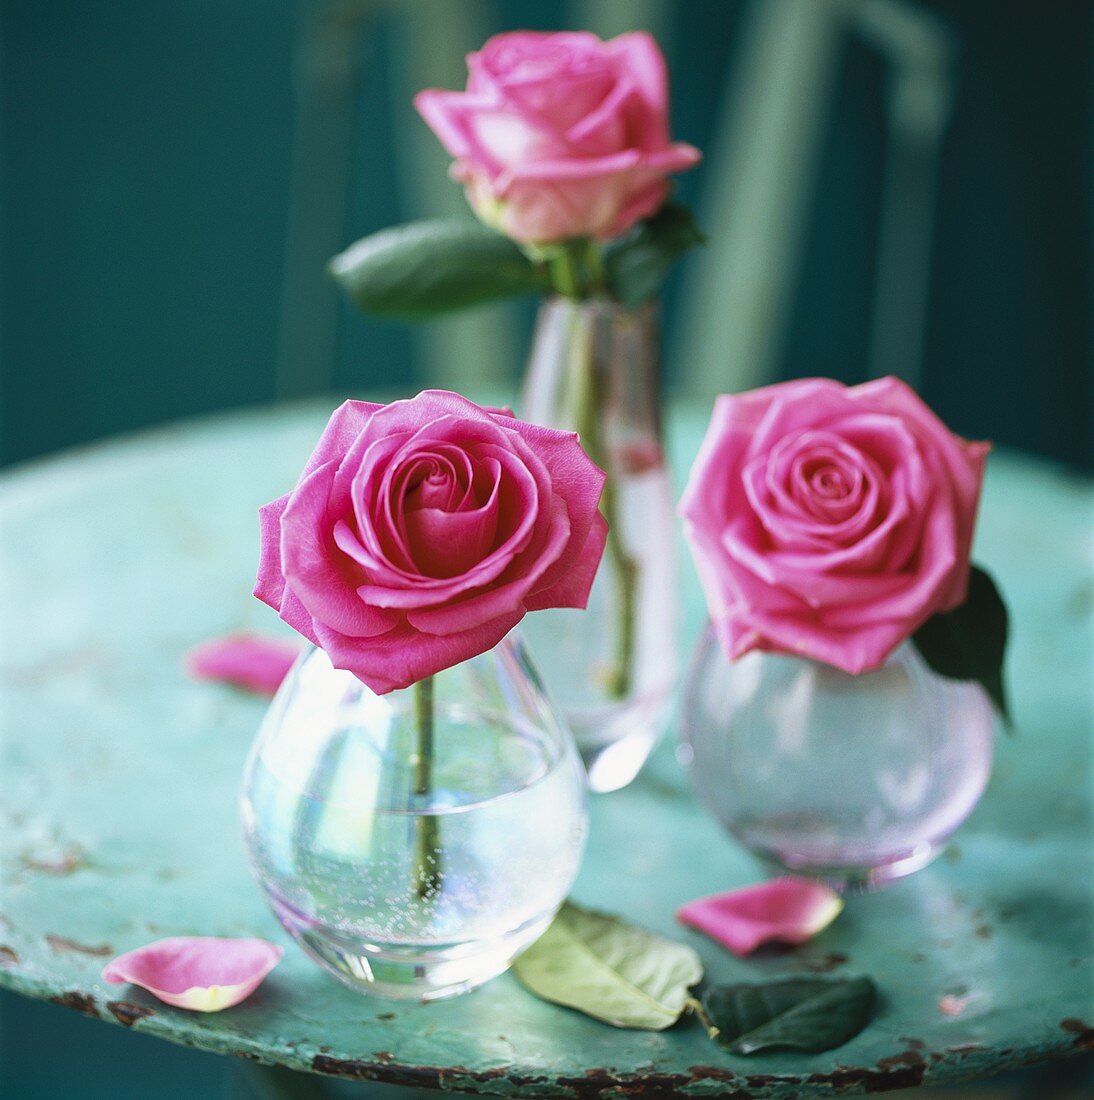 Three pink roses in vases on a garden table